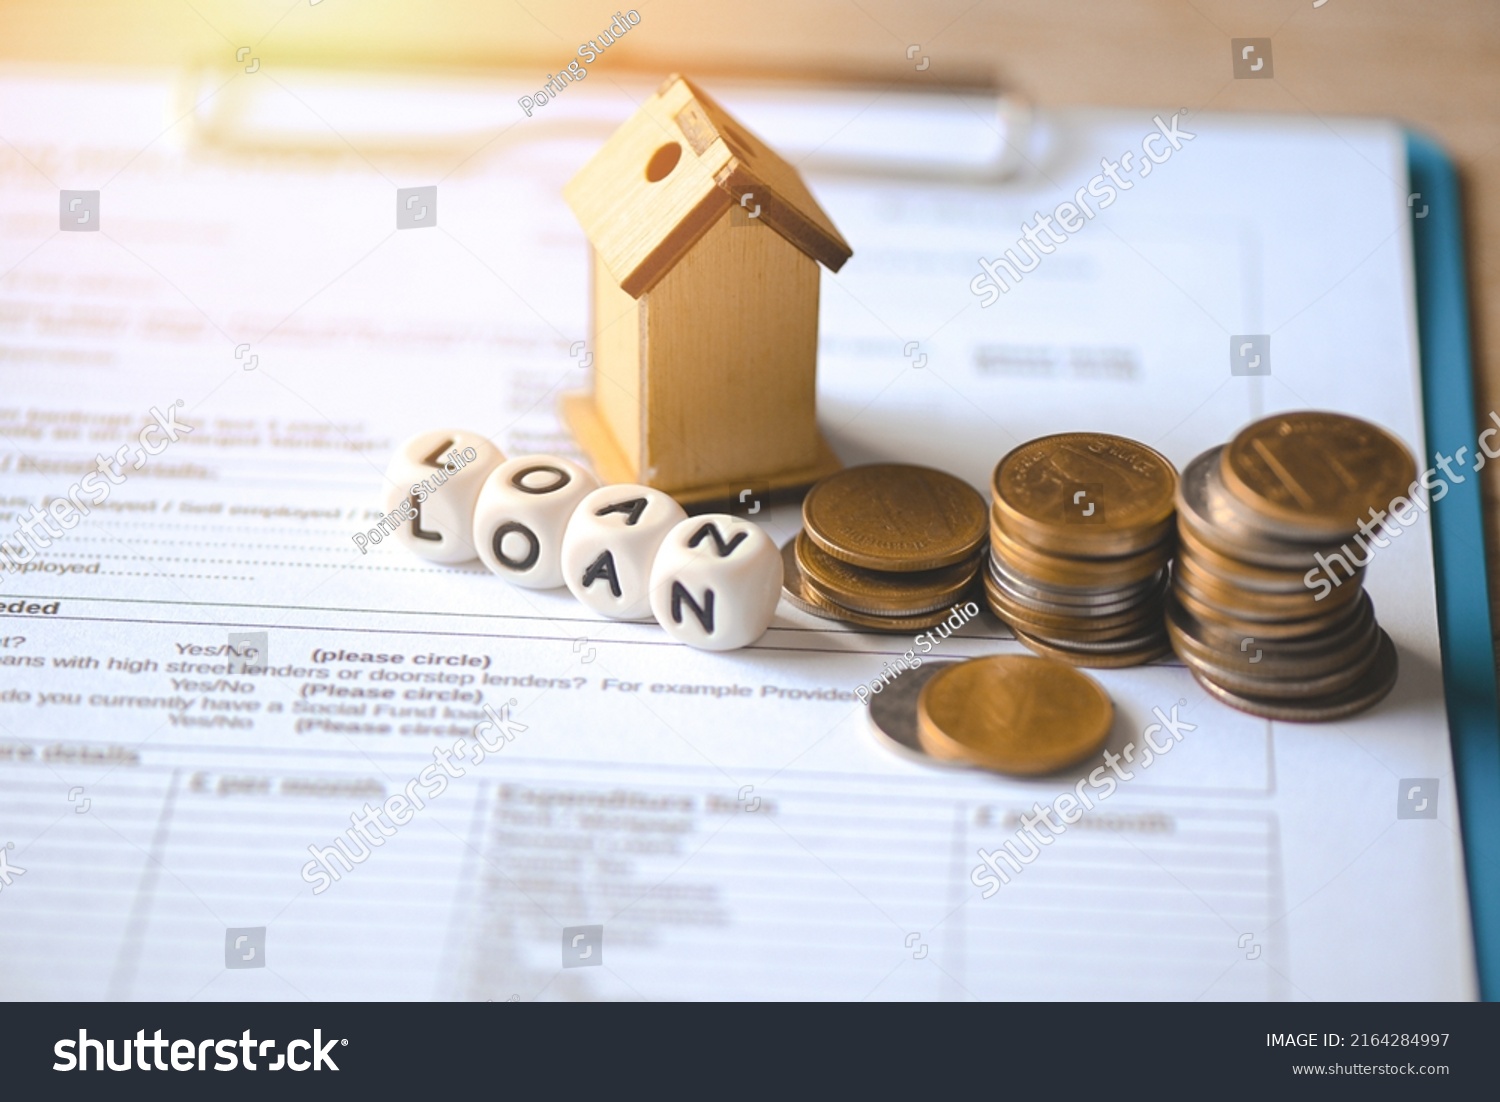 Home loan concept, Loan application form paper with money coin and loan house model on table, Loan business finance economy commercial real estate investments concept #2164284997